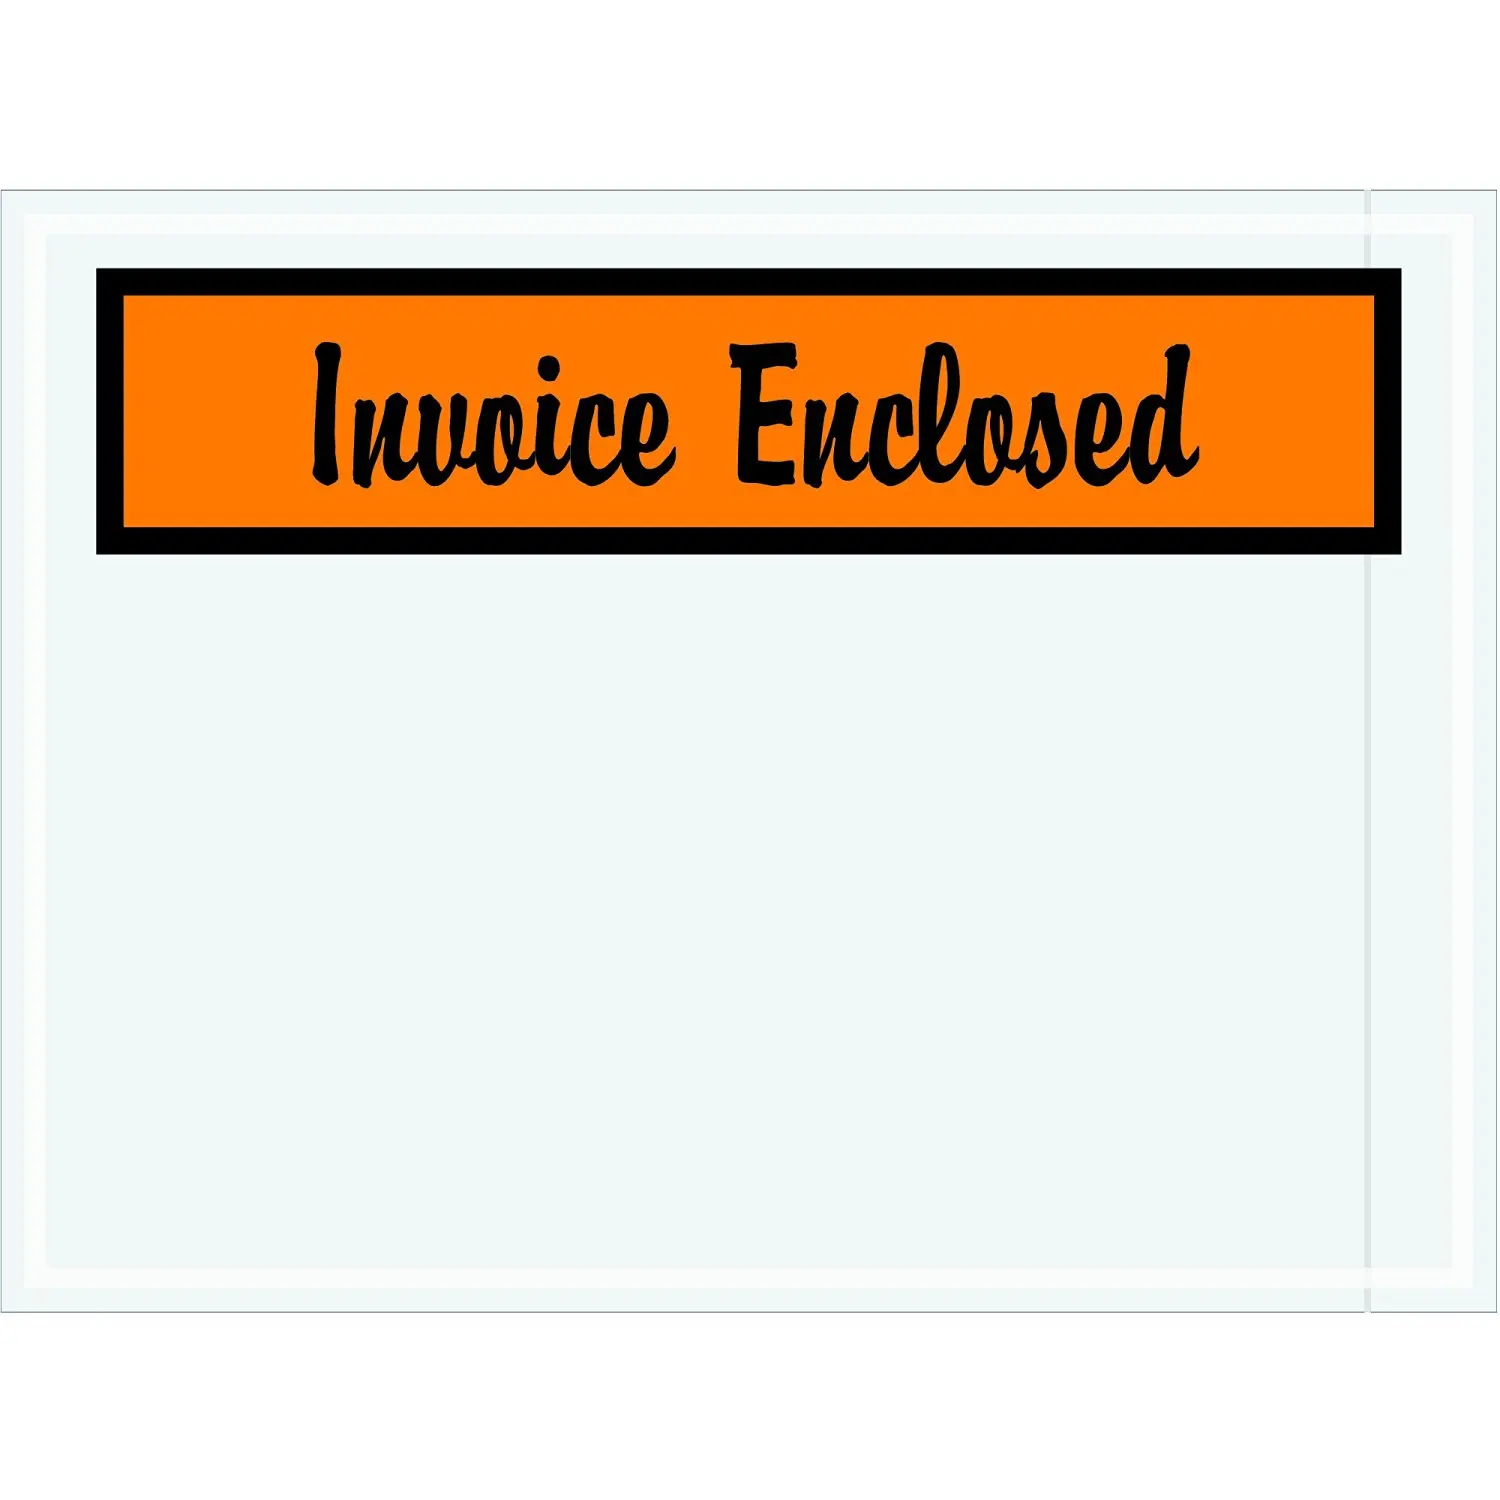 Case of 1000 Black on Orange This Envelope Contains Important Papers Do Not Destroy Aviditi PL416 Poly Envelope LegendINVOICE ENCLOSED 2 mil Thick 4-1//2 Length x 6 Width